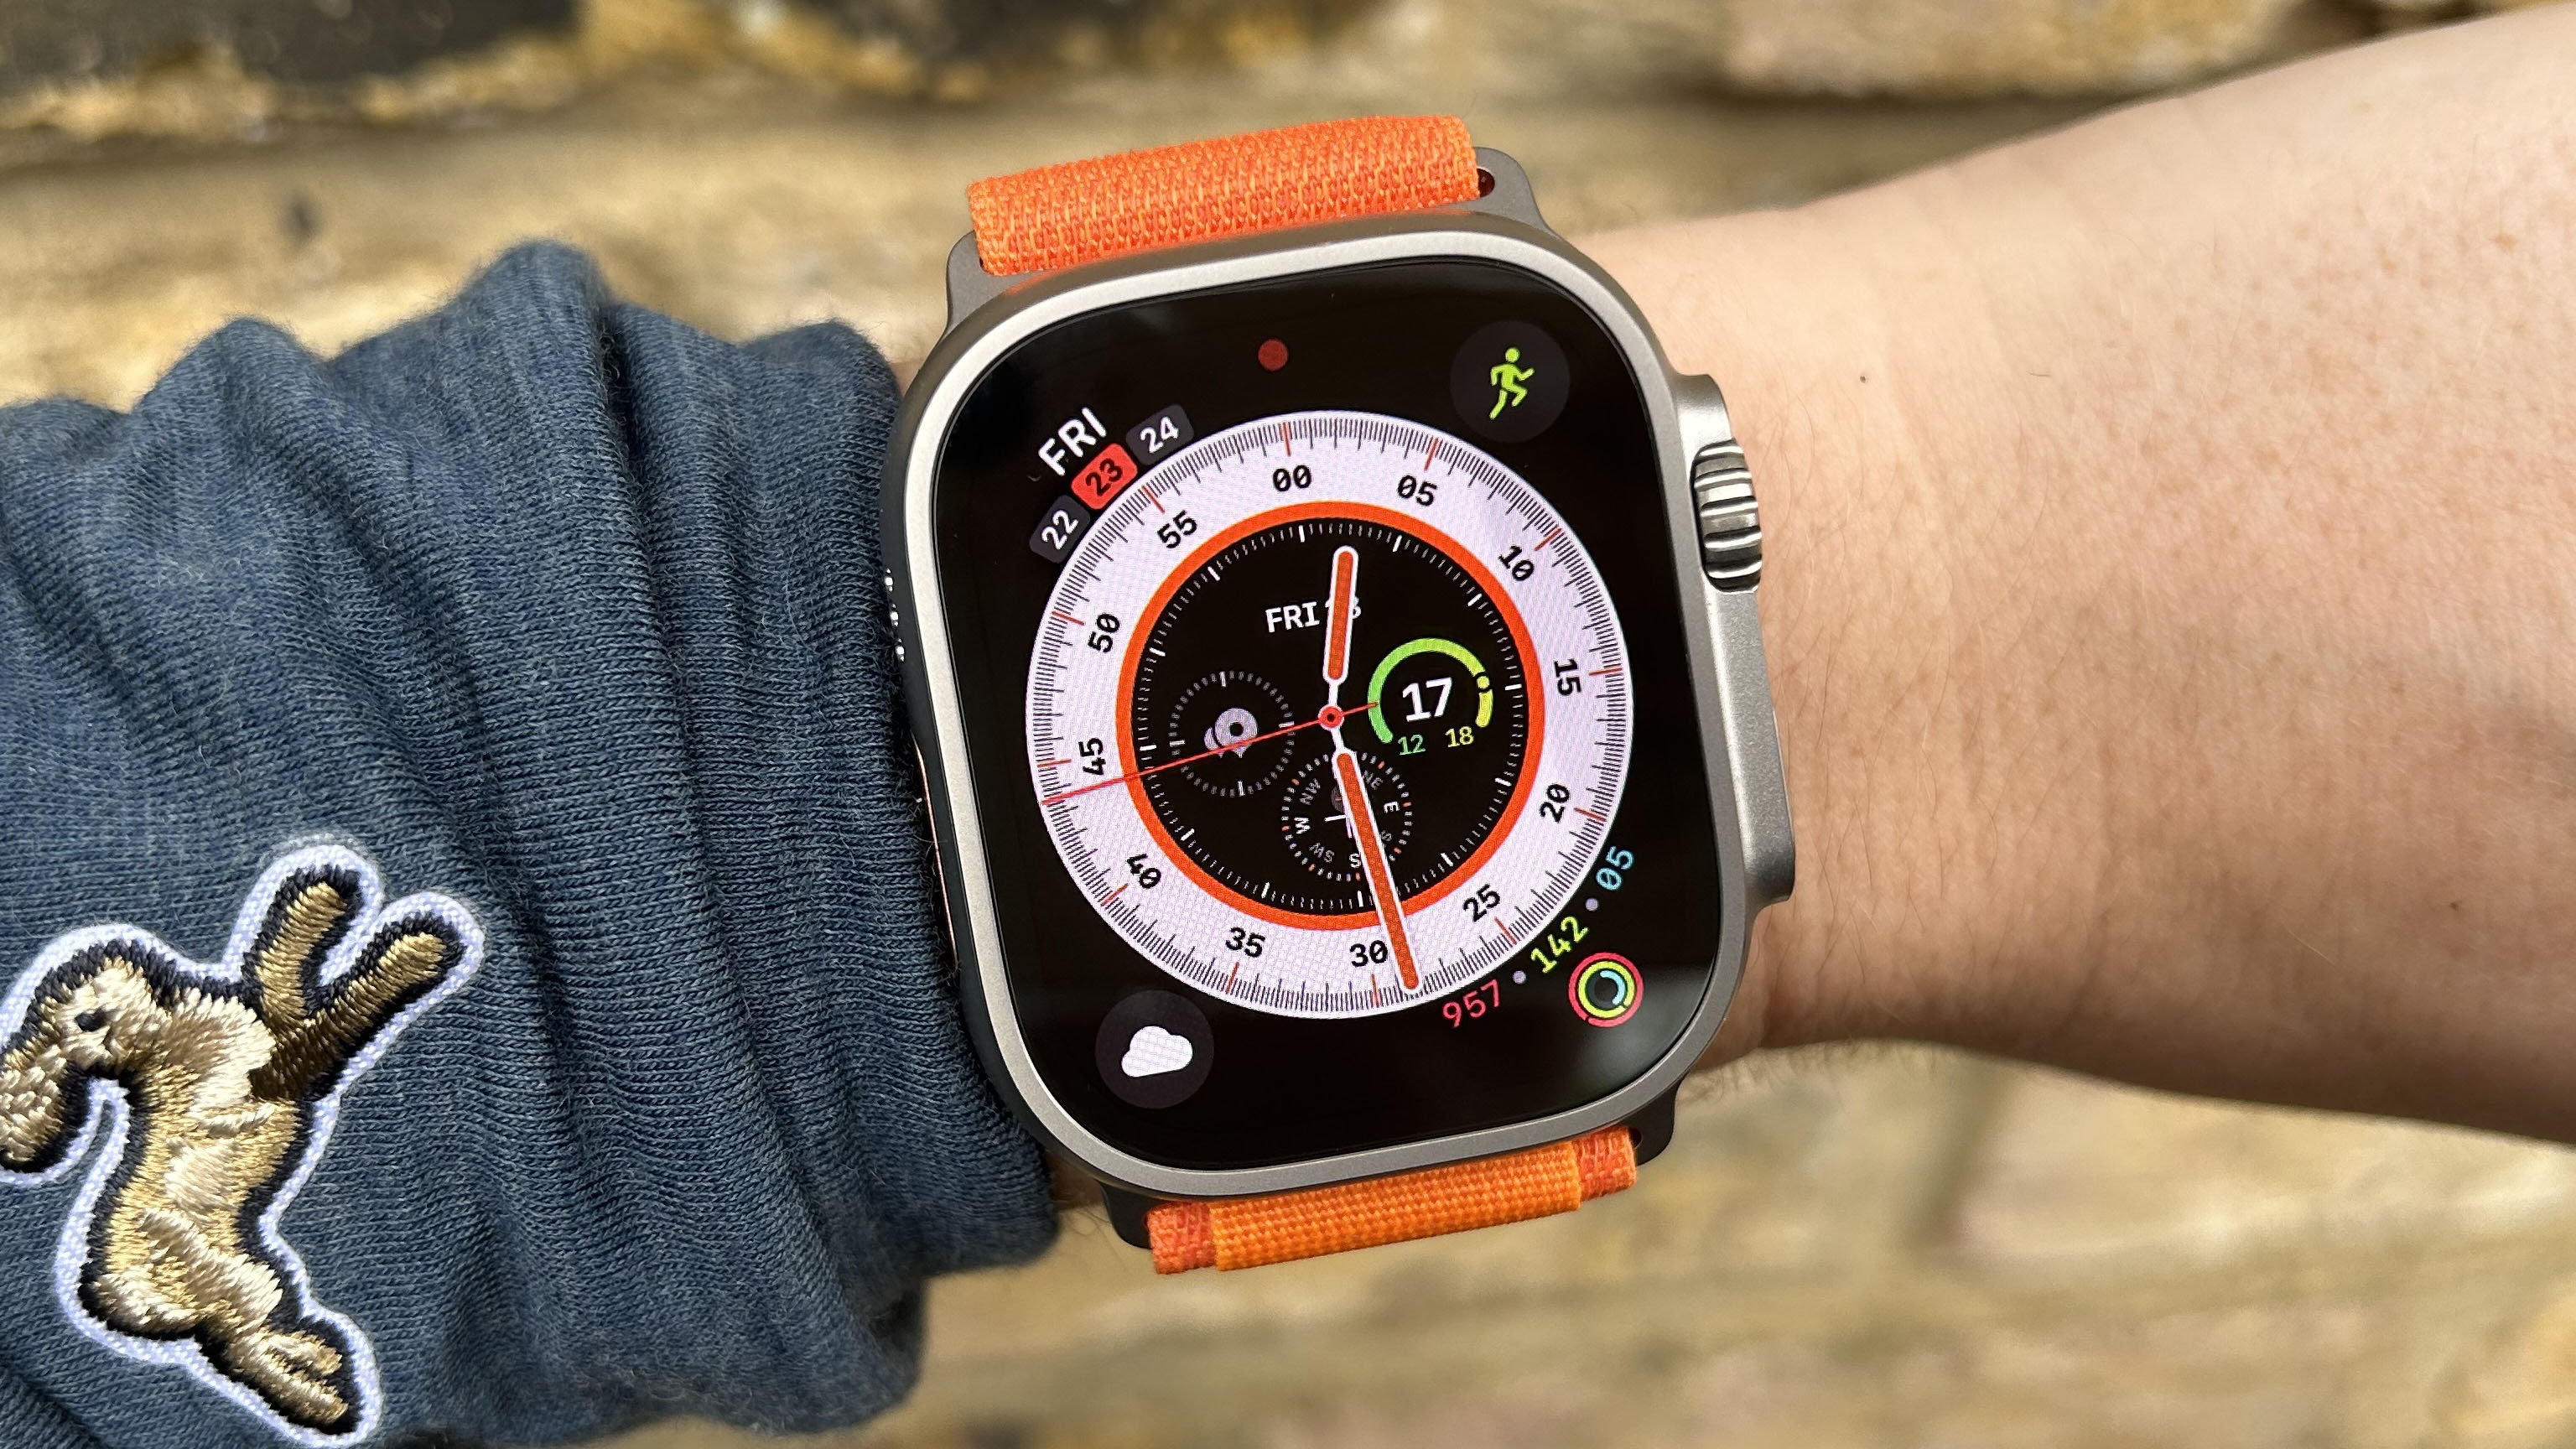 This is my favorite Apple Watch fitness feature you're probably